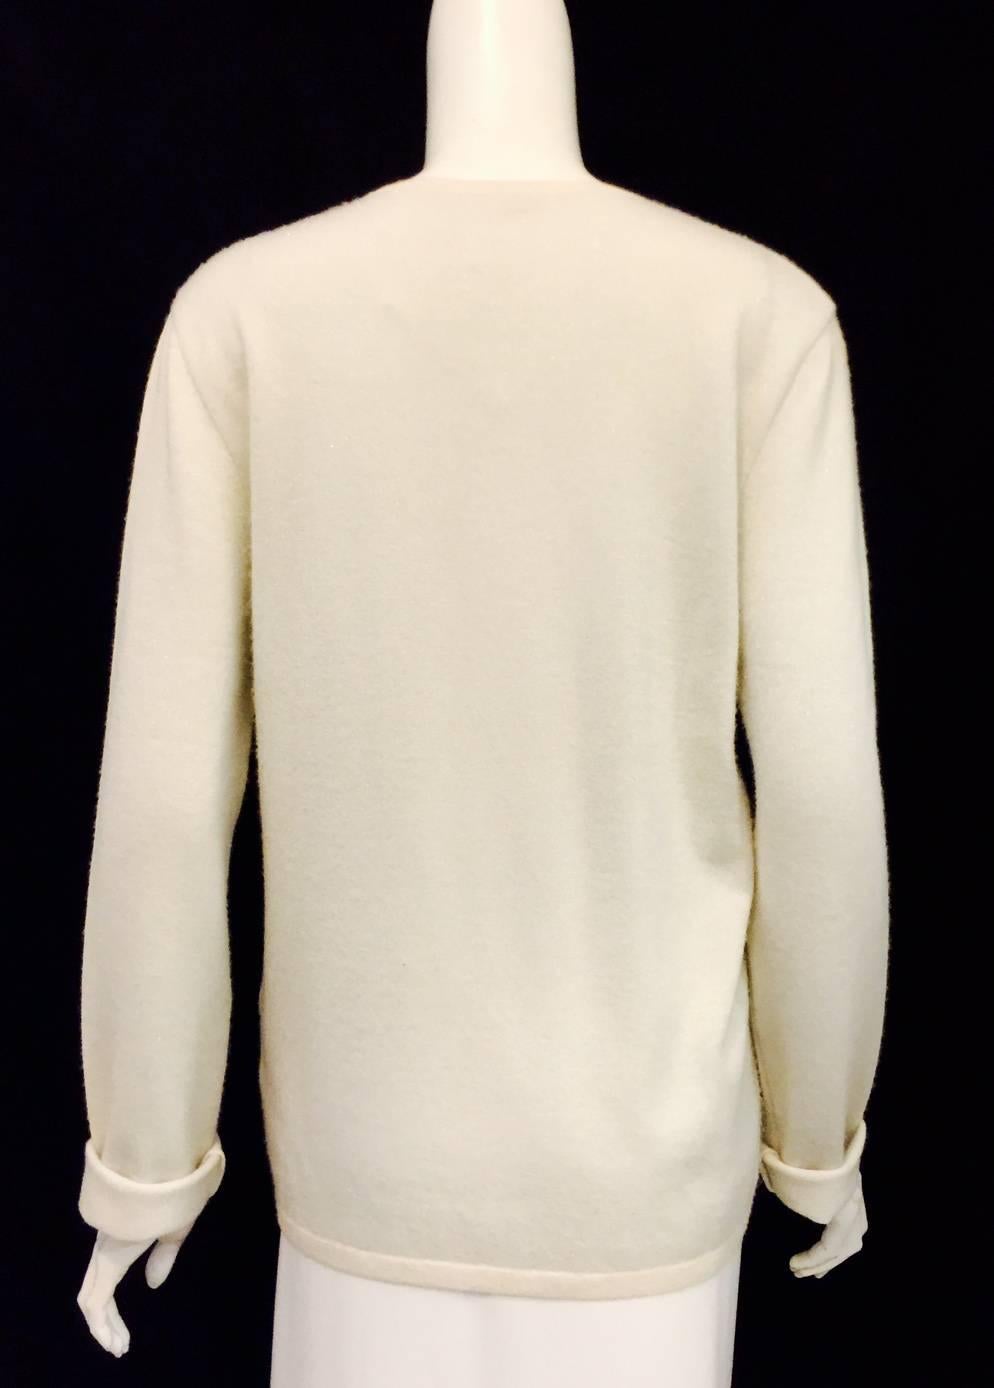 Women's Chanel Cashmere Blend Ivory Pullover With Silver Metallic Threads Sz 46